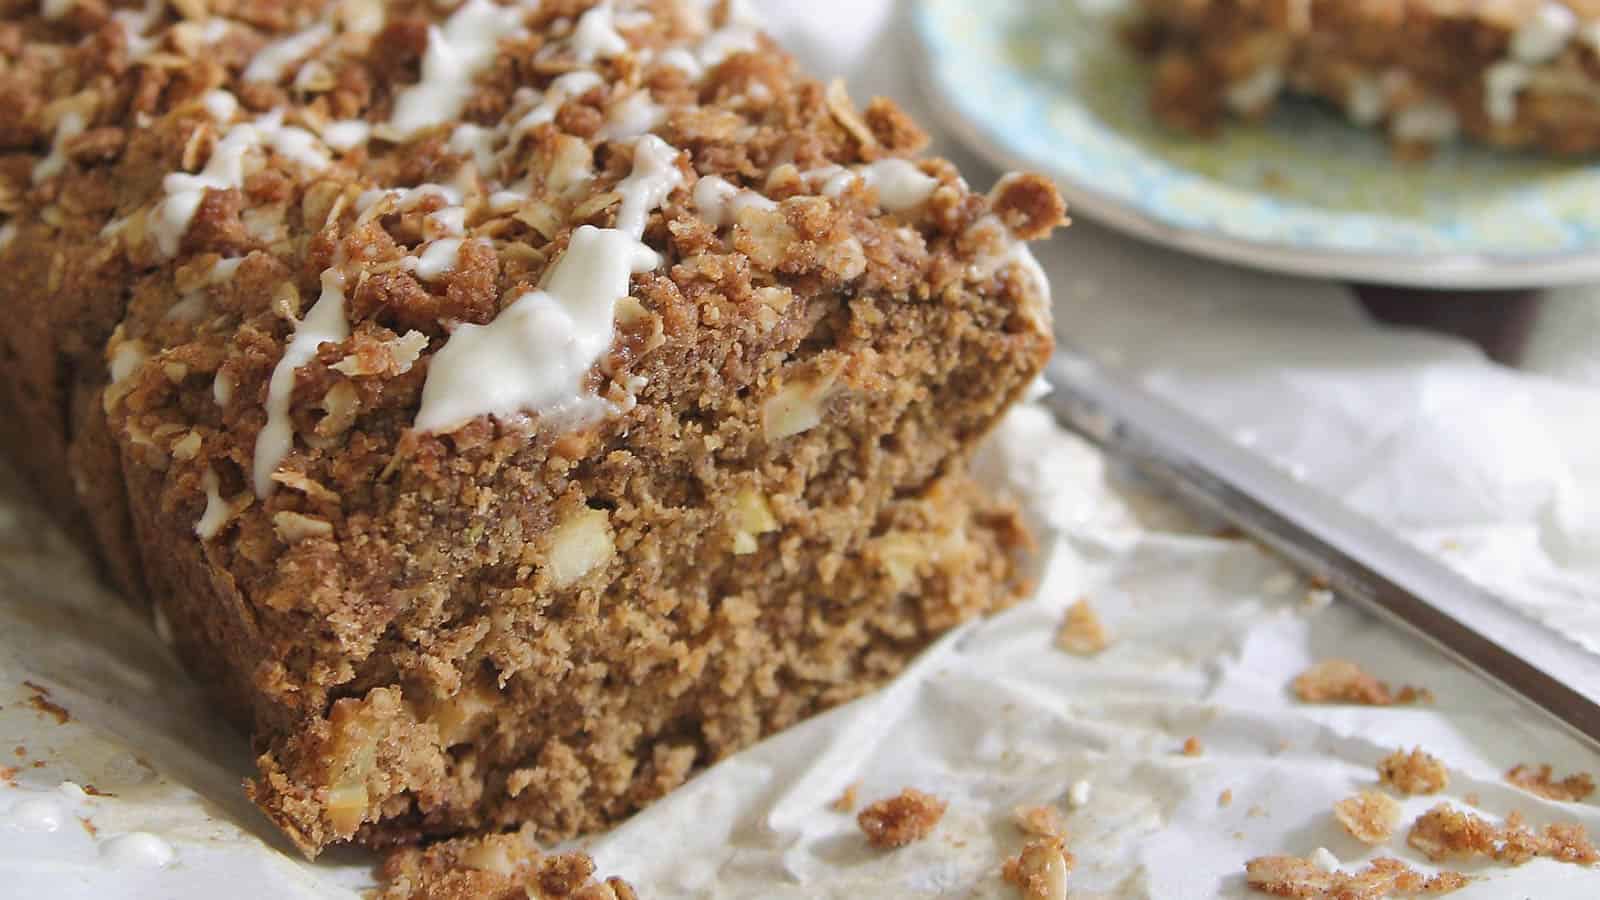 Apple streusel bread drizzled with icing.